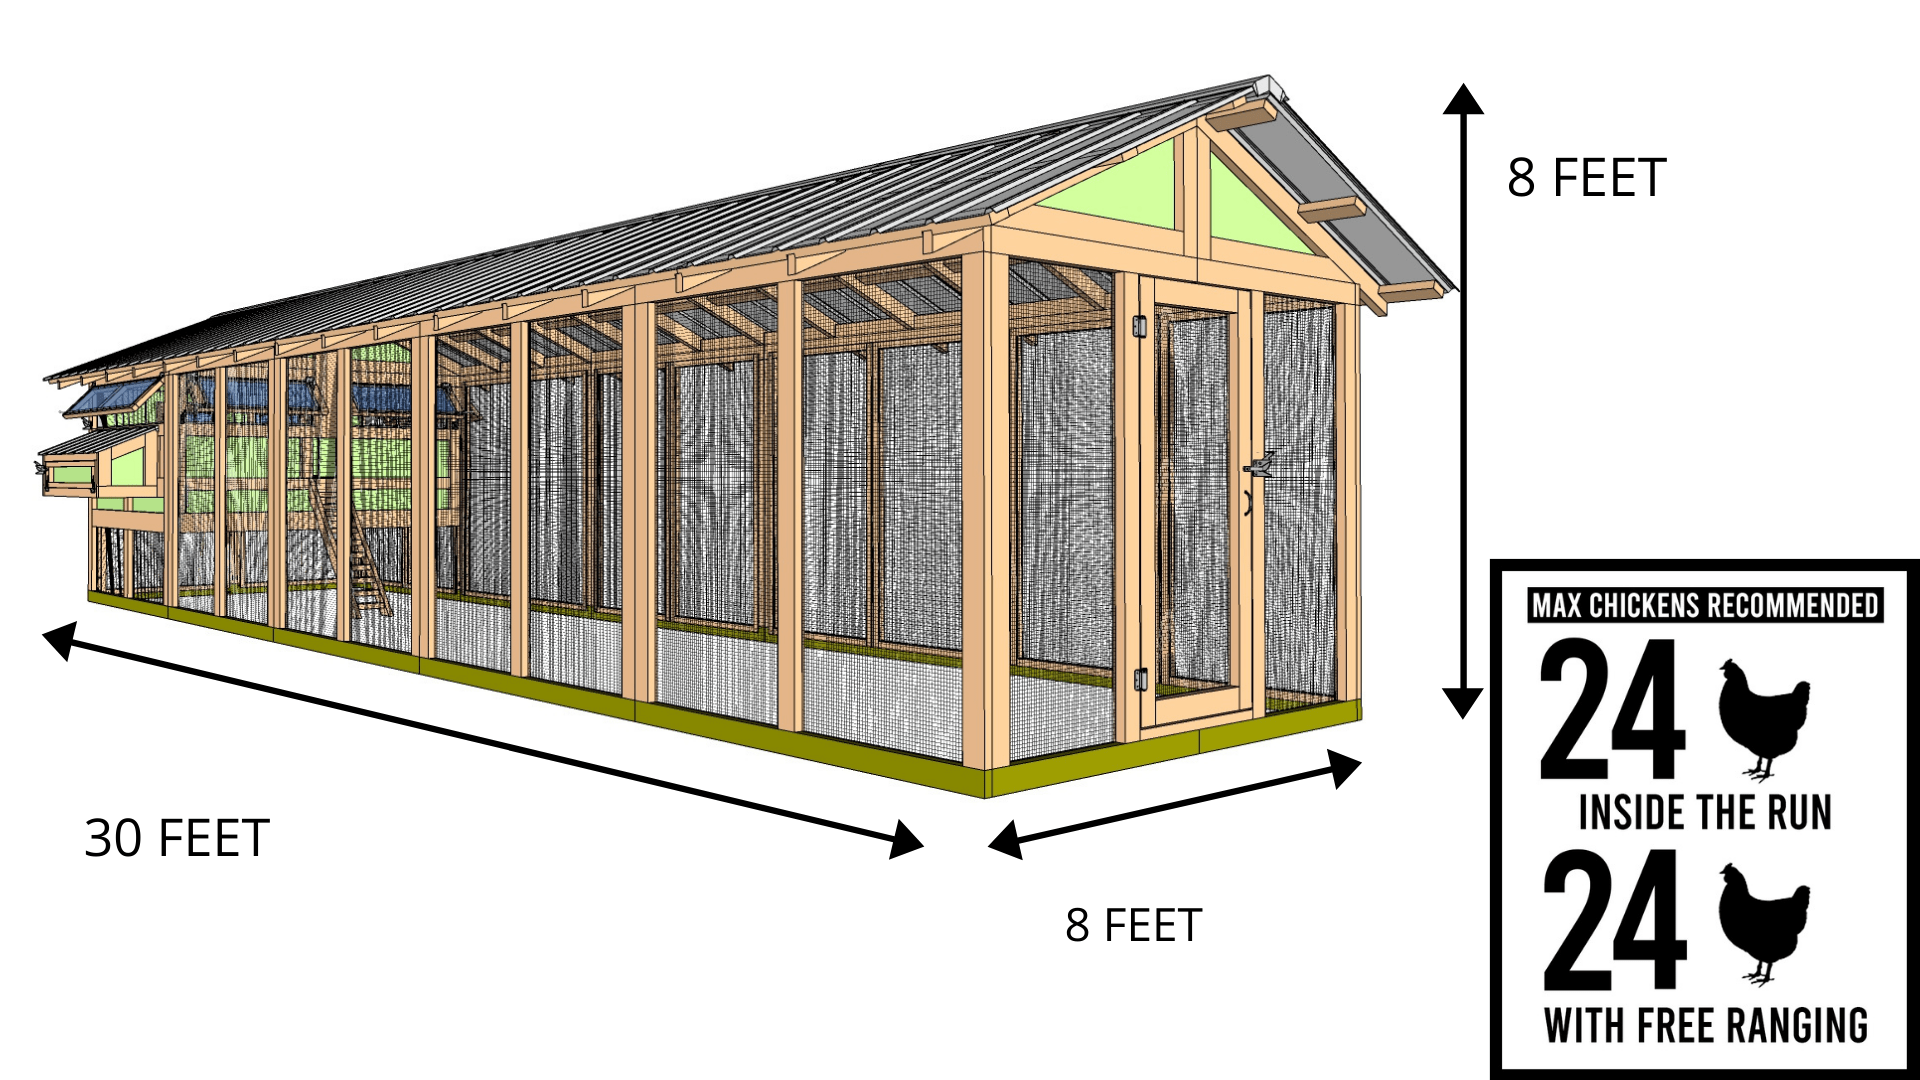 8'x30' American Coop with 6'x8' henhouse with chicken amounts